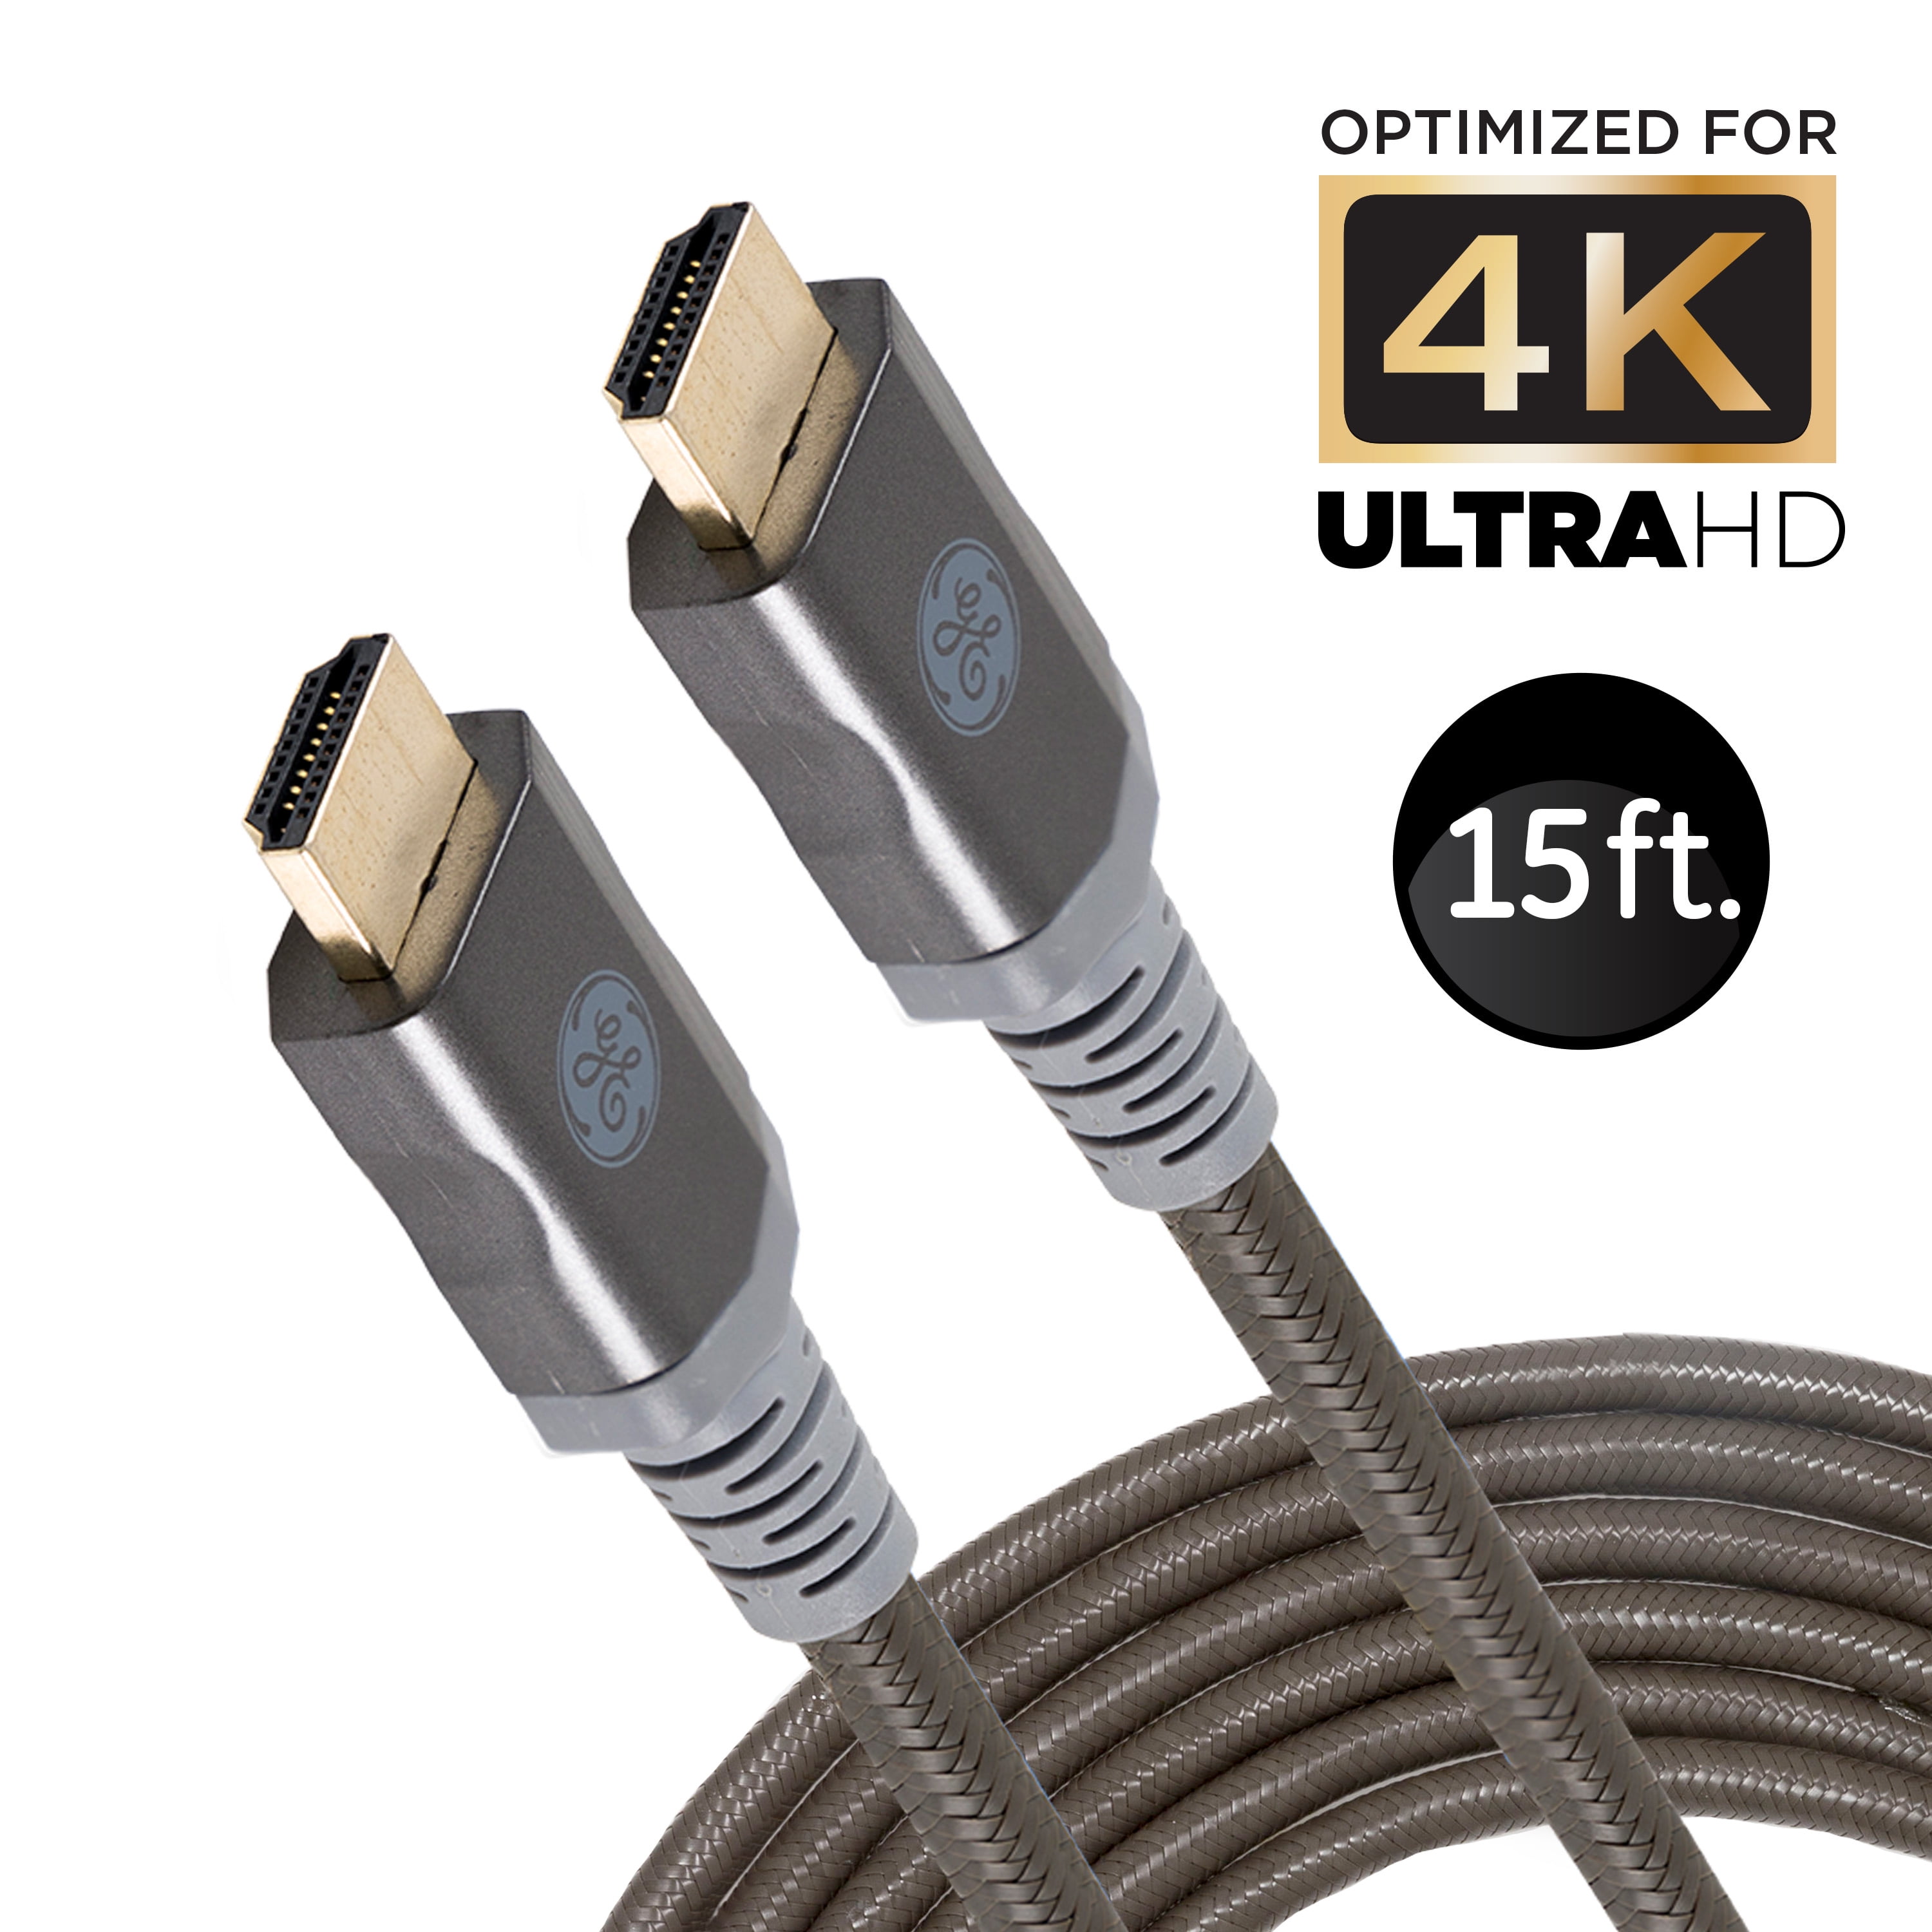 GE 15ft 2.0 Cable with Ethernet, Gold-Plated Connectors, 48722 - Walmart.com